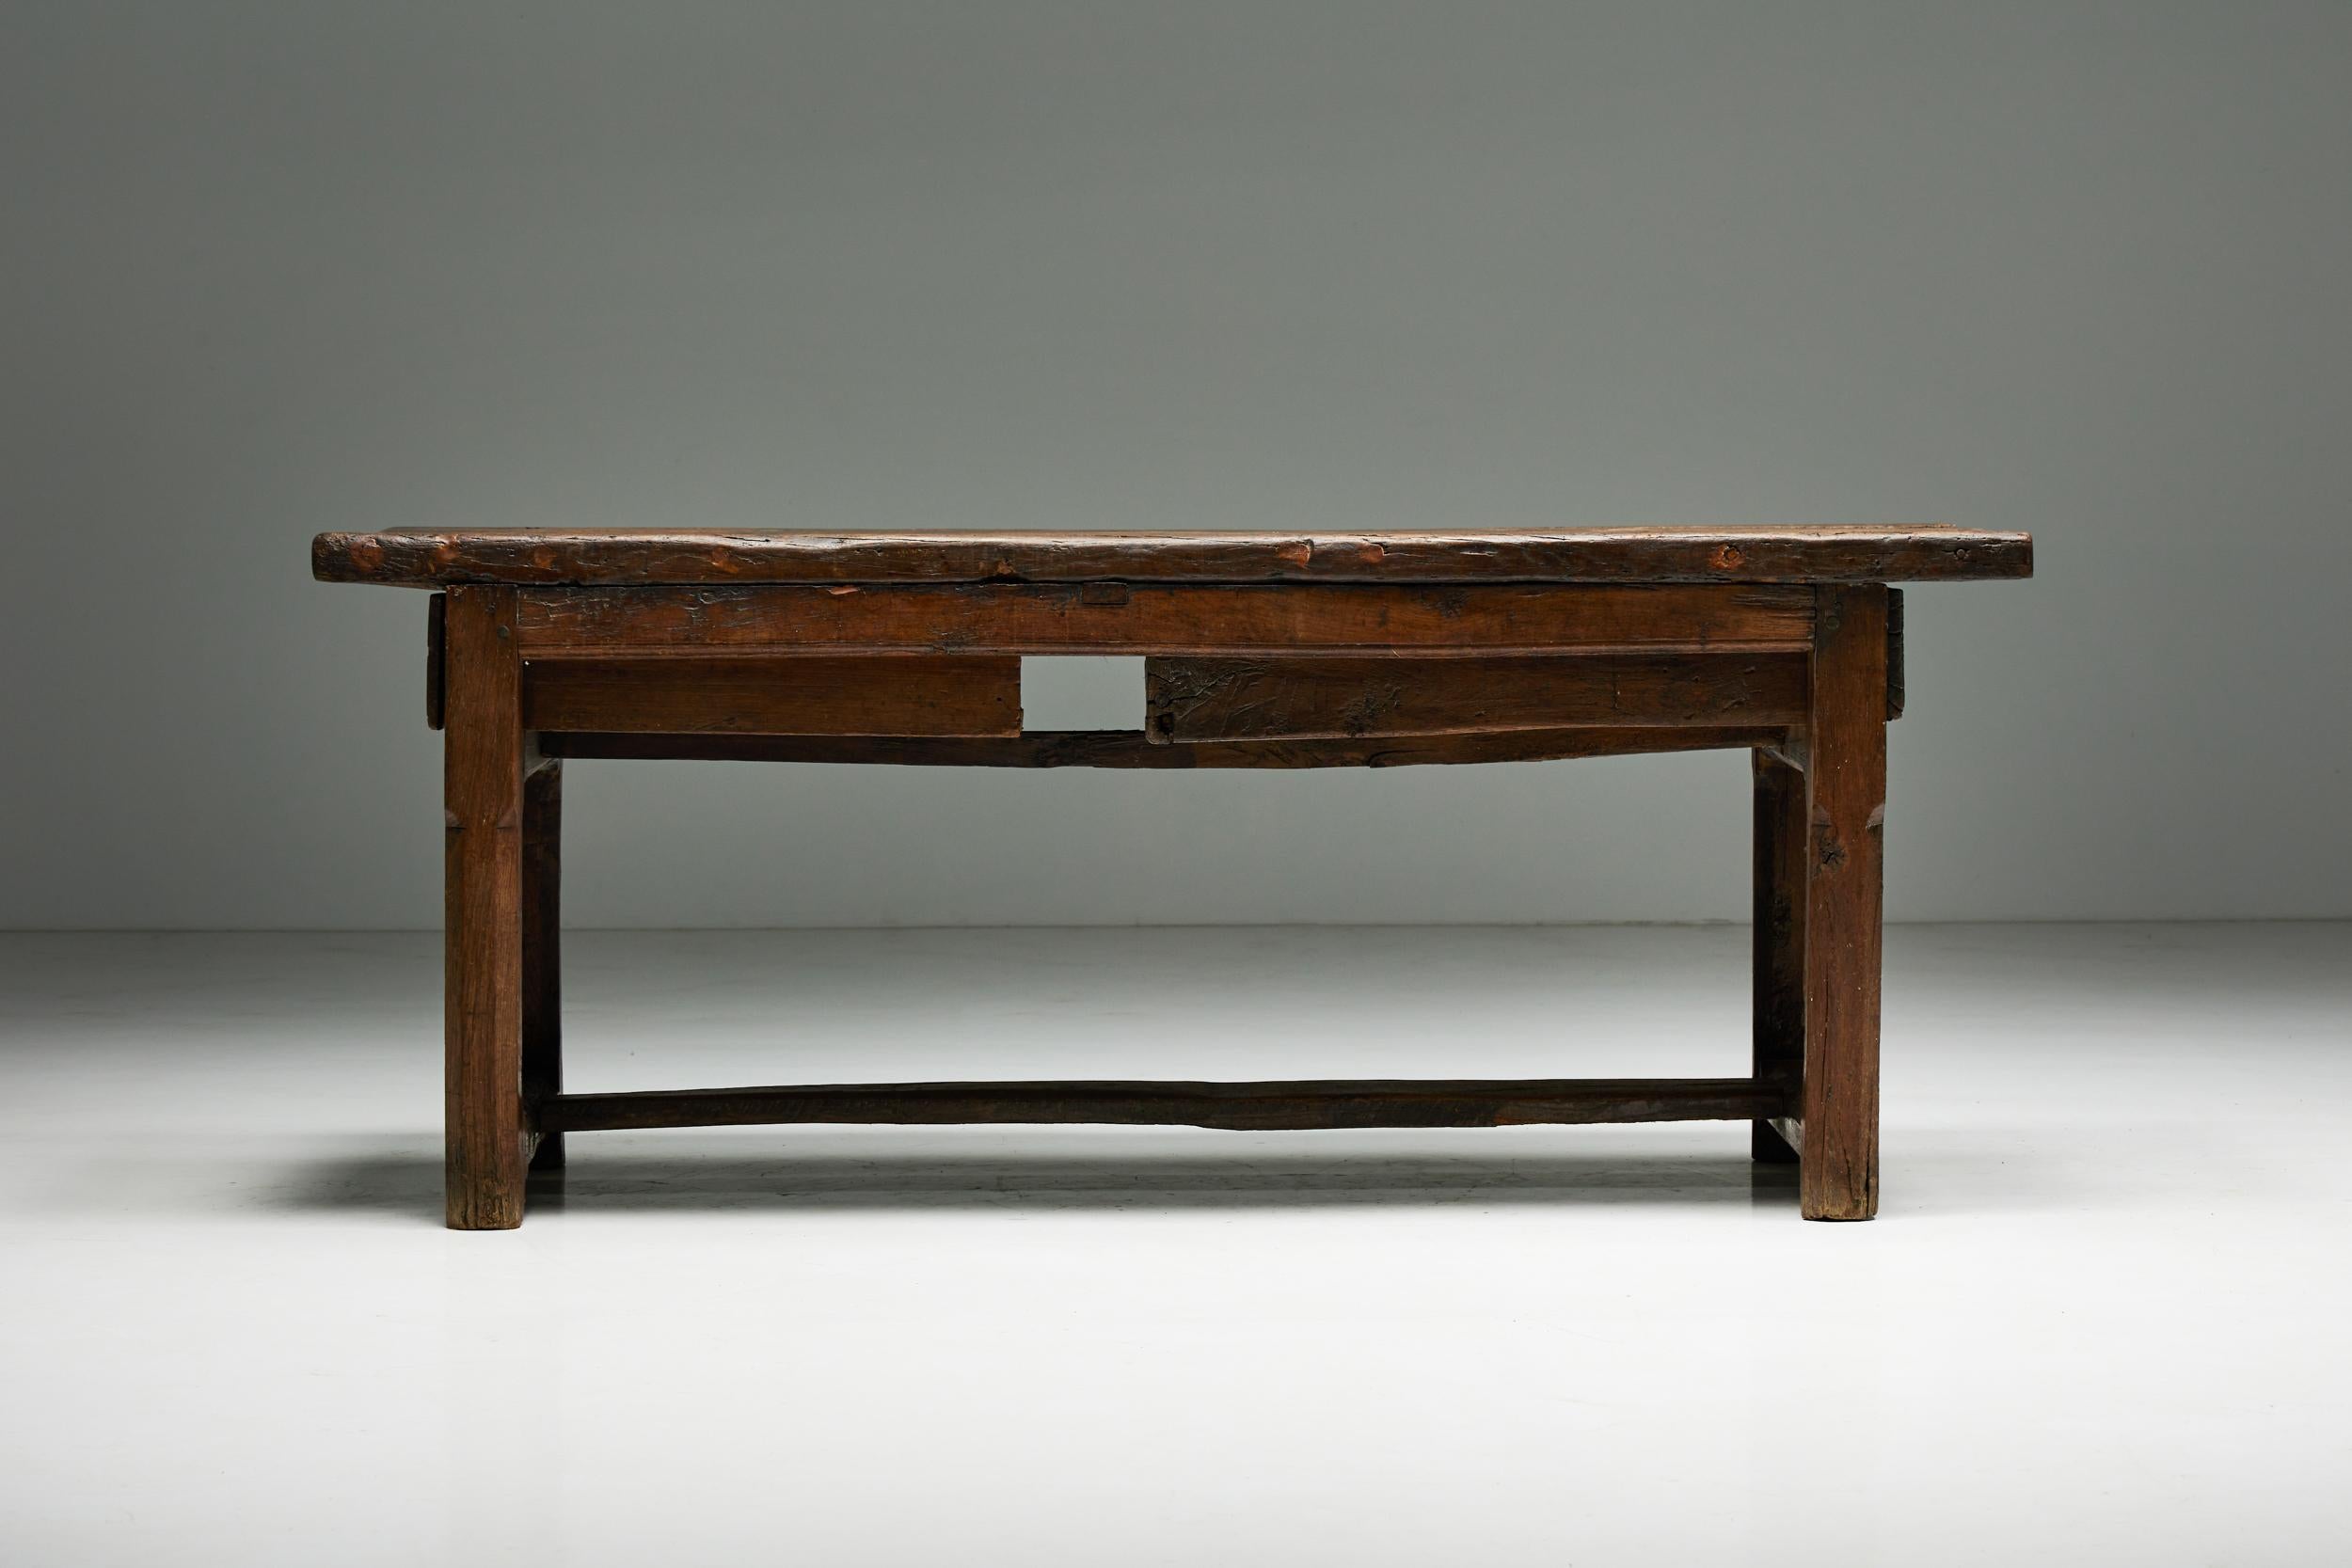 Art Populaire; Rustic; Monoxylite; Console; Dining Table; Table; France; Auvergne; Wabi Sabi; Naive; Folk Art; Travail Populaire; Desk; Console Table; 

19th-century writing table or desk, a true testament to the rich heritage of French